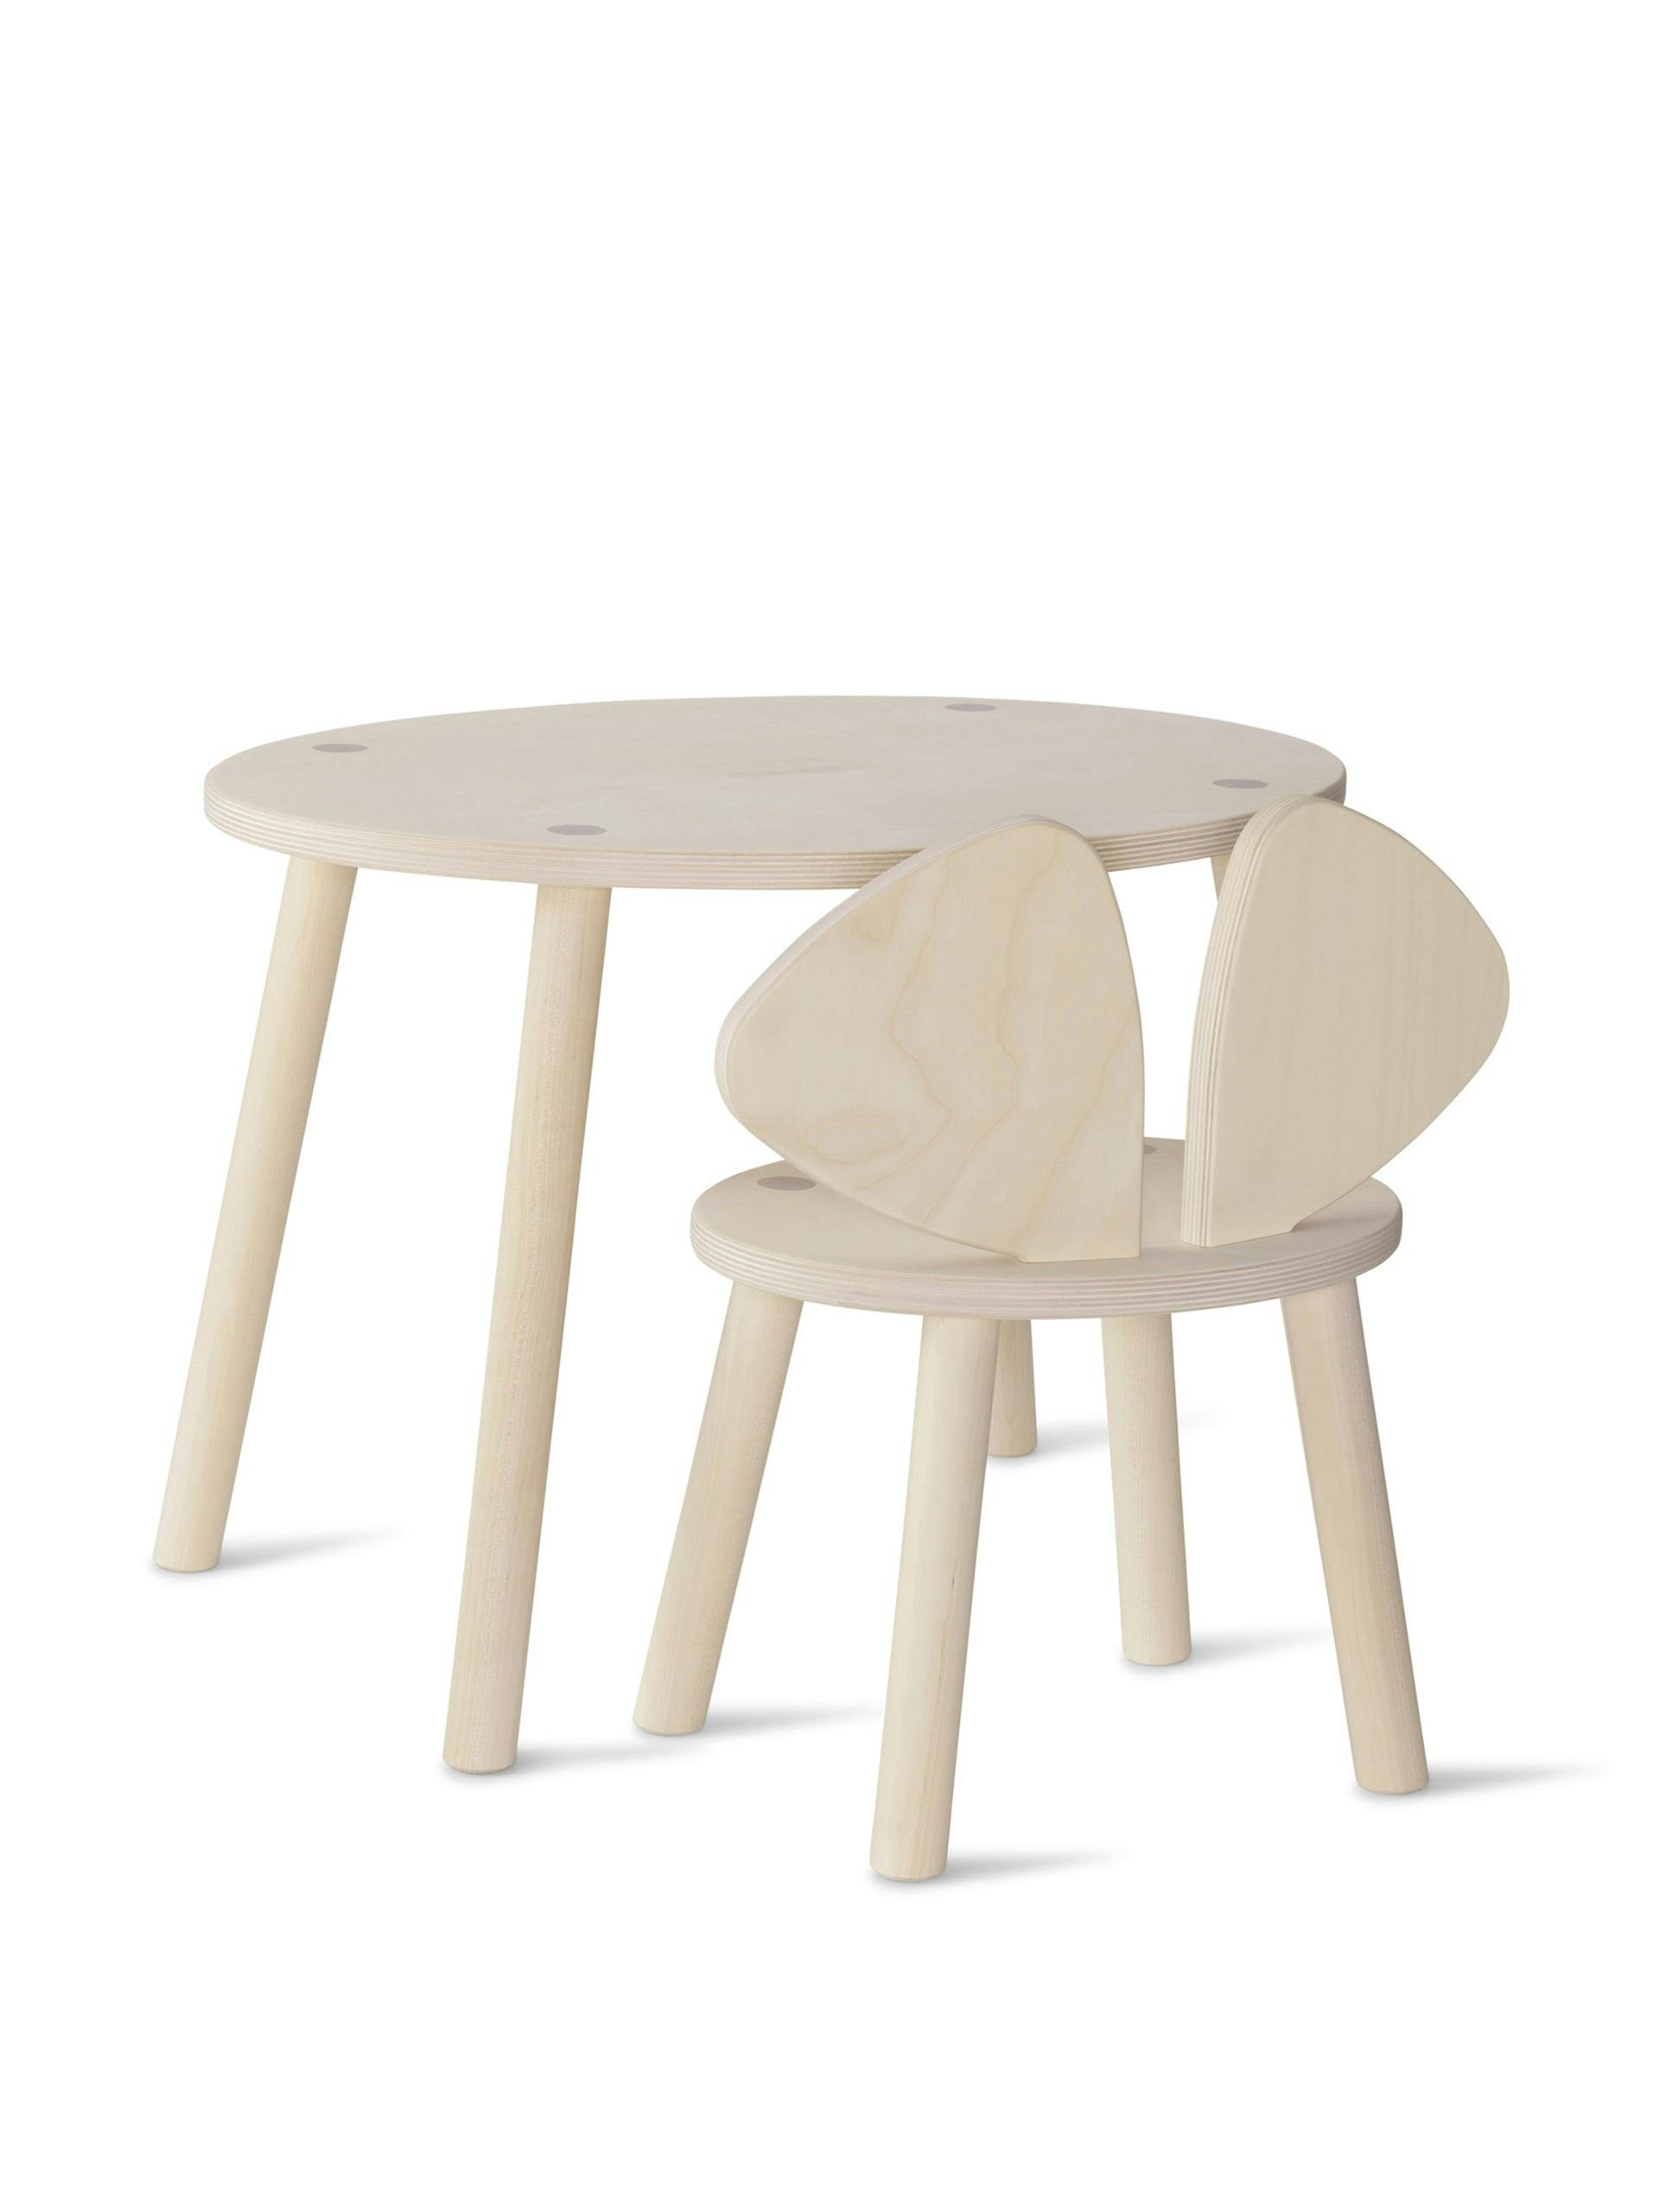 Birch mouse table and chair